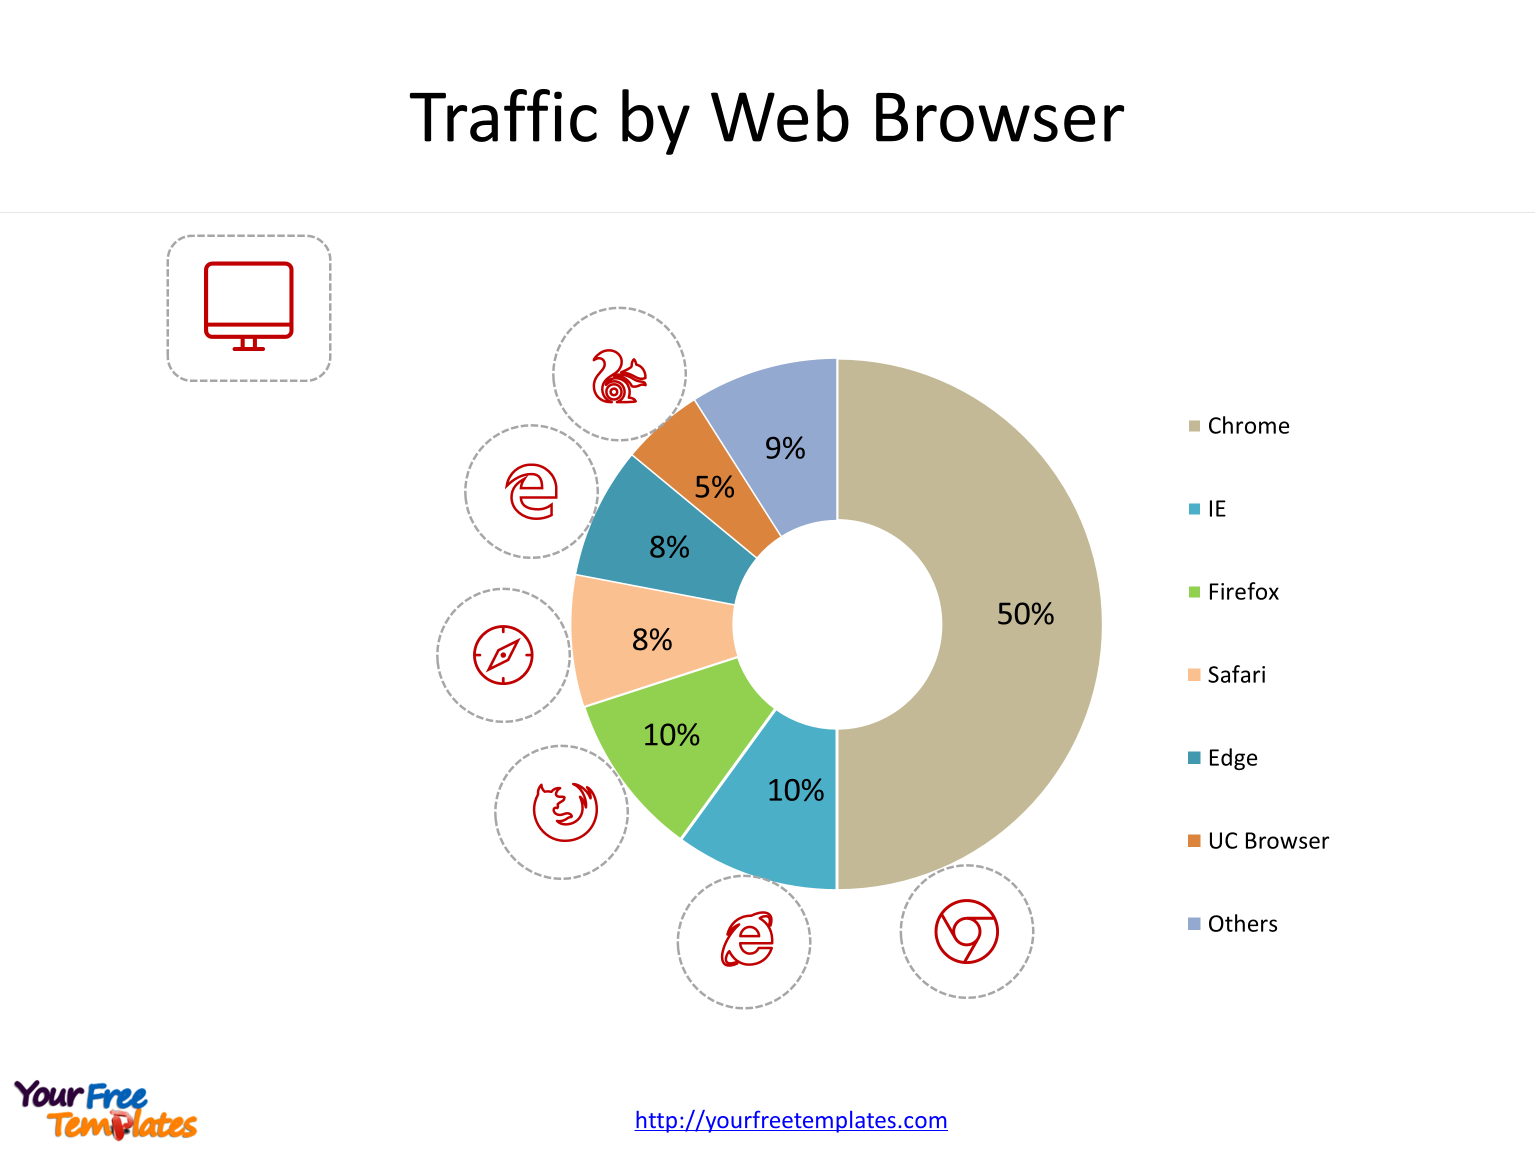 Web analytics for traffic by Web Browsers in the Web analytics PowerPoint templates